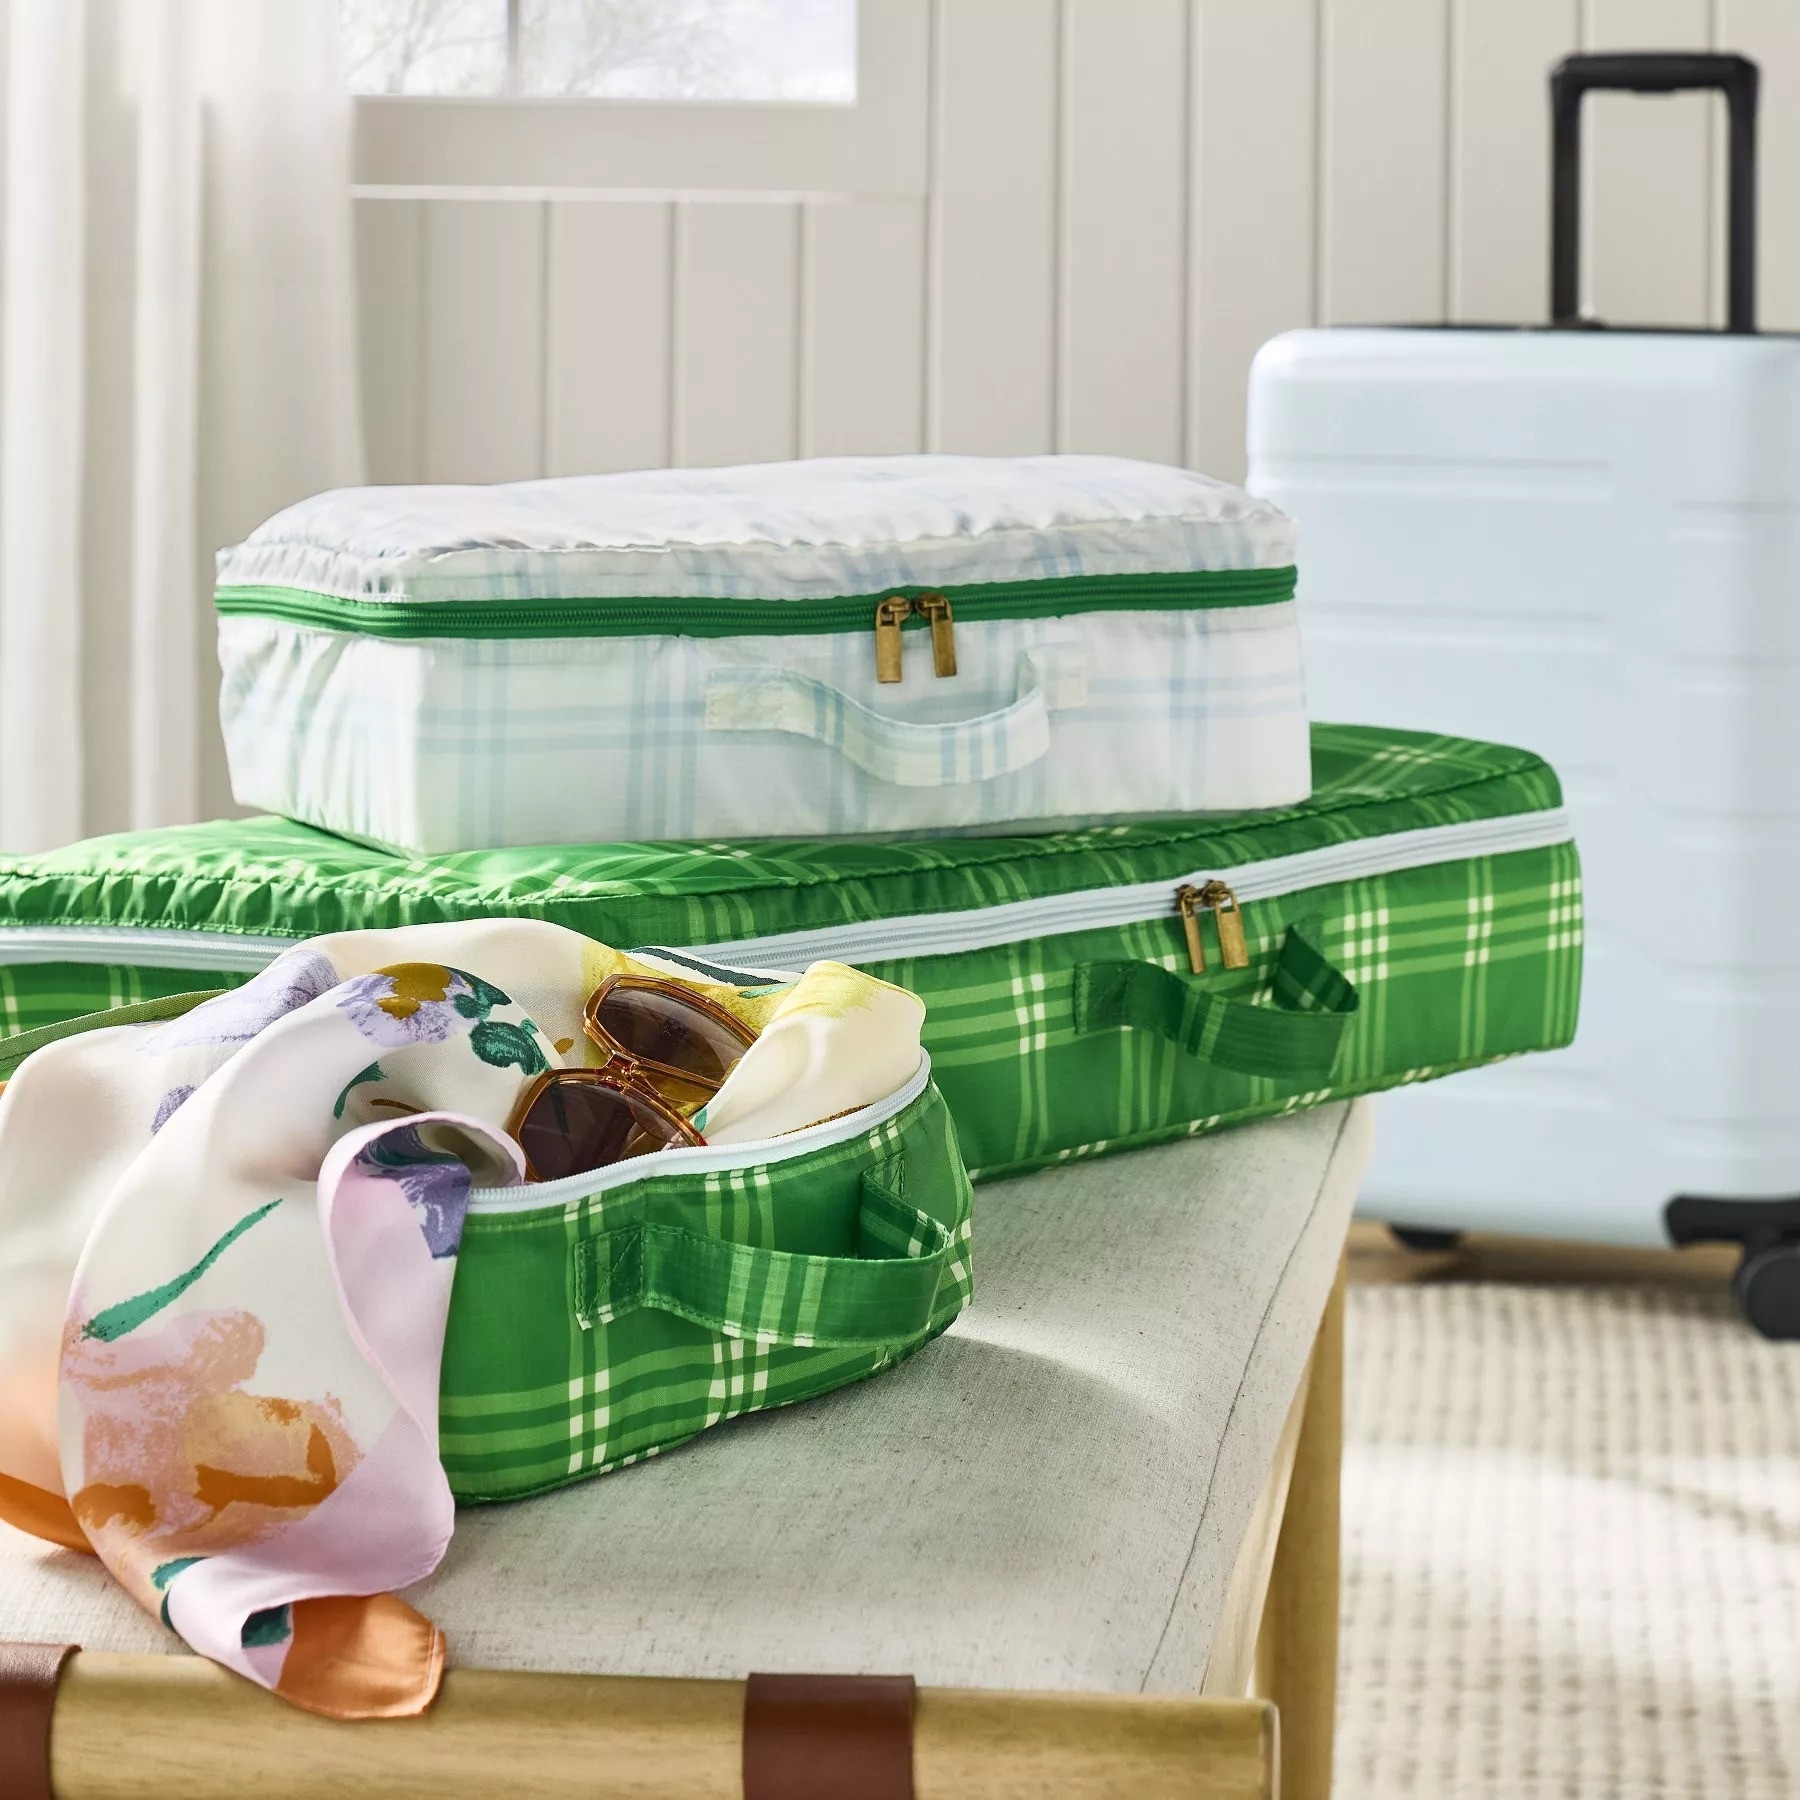 Stacked plaid patterned packing cubes with clothes on a bench, suggesting an organized travel packing solution